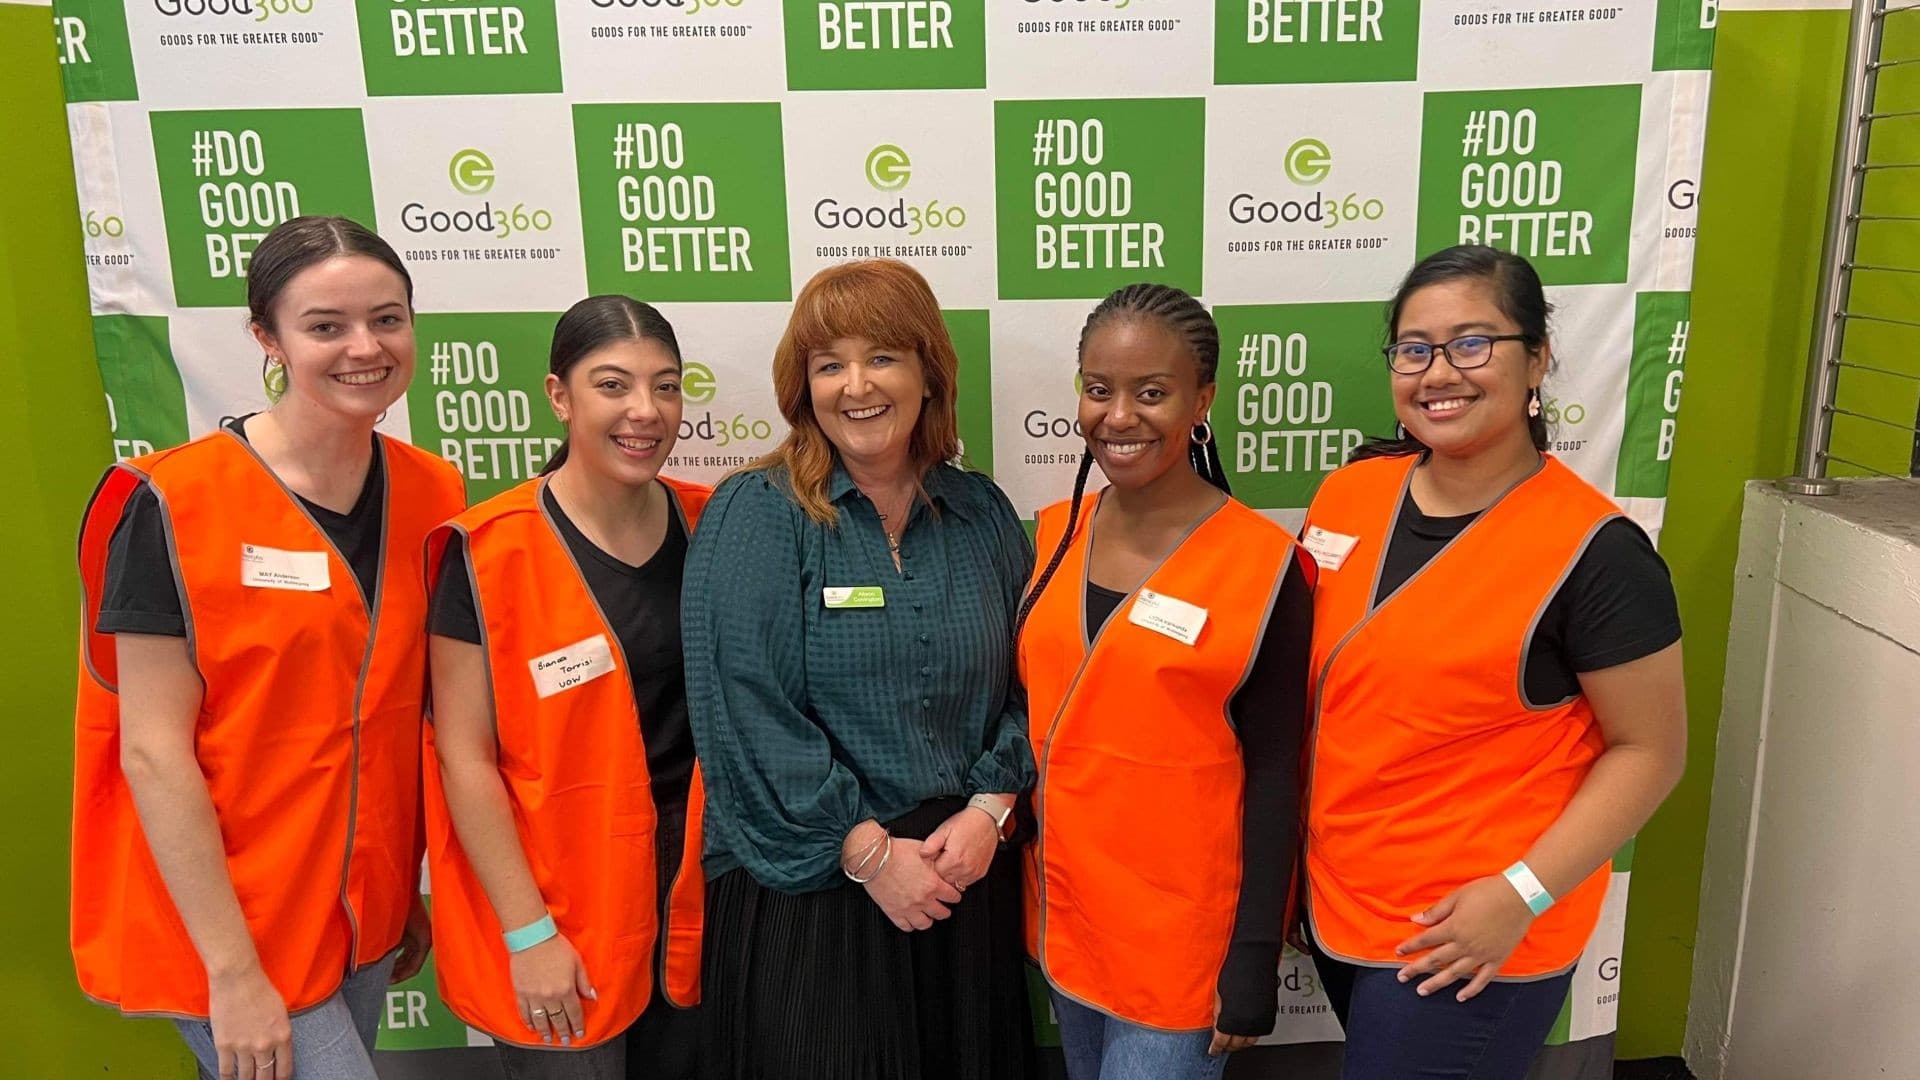 Four UOW students, wearing orange reflective vests, stand either side of Alison Covington, from Good360, who is wearing a green shirt. They are in front of a media wall. Photo: Supplied